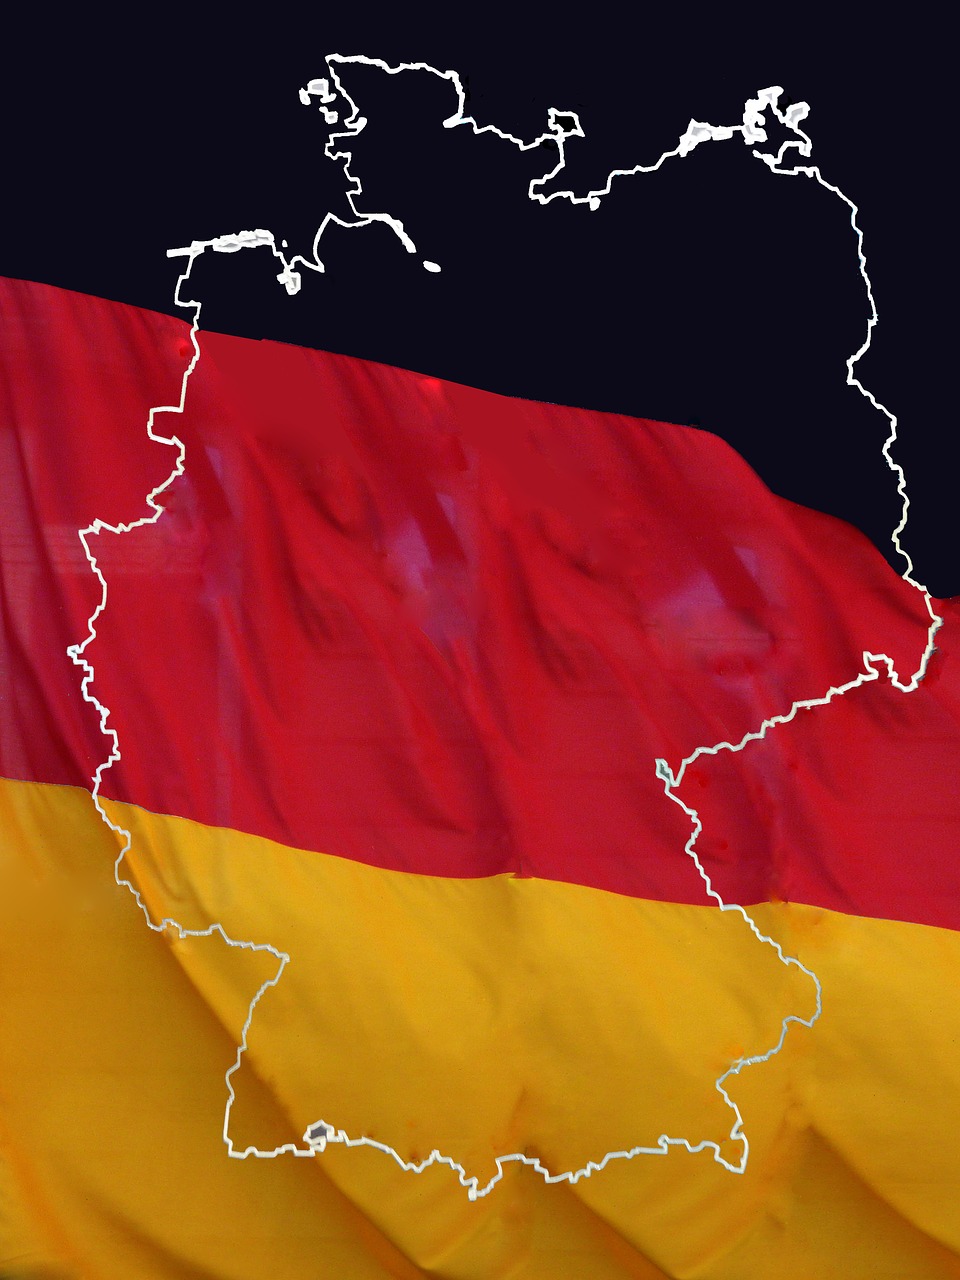 federal republic of german germany map free photo